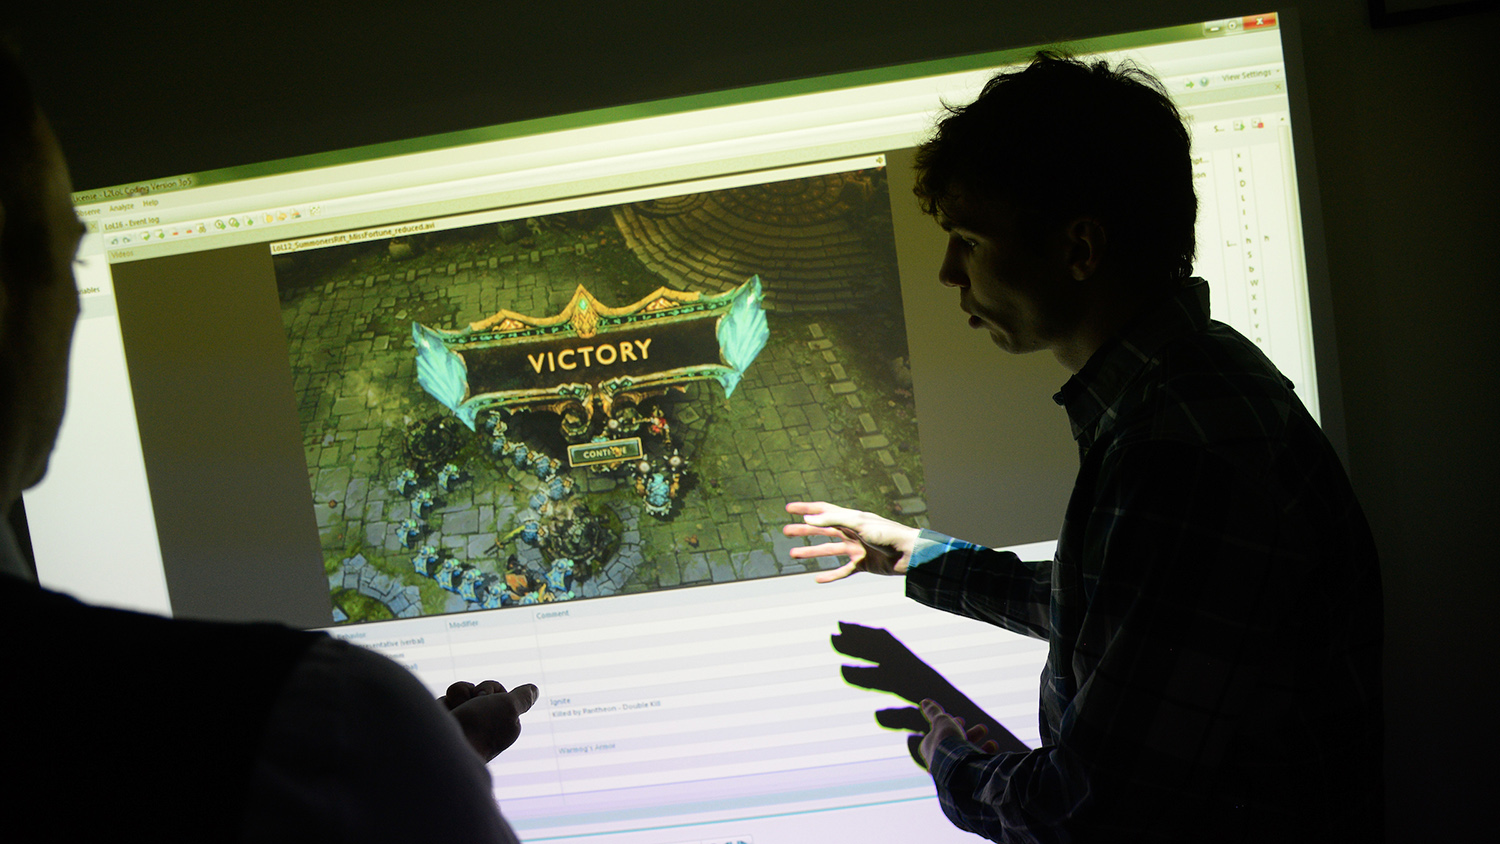 A student demonstrates his project on a large screen